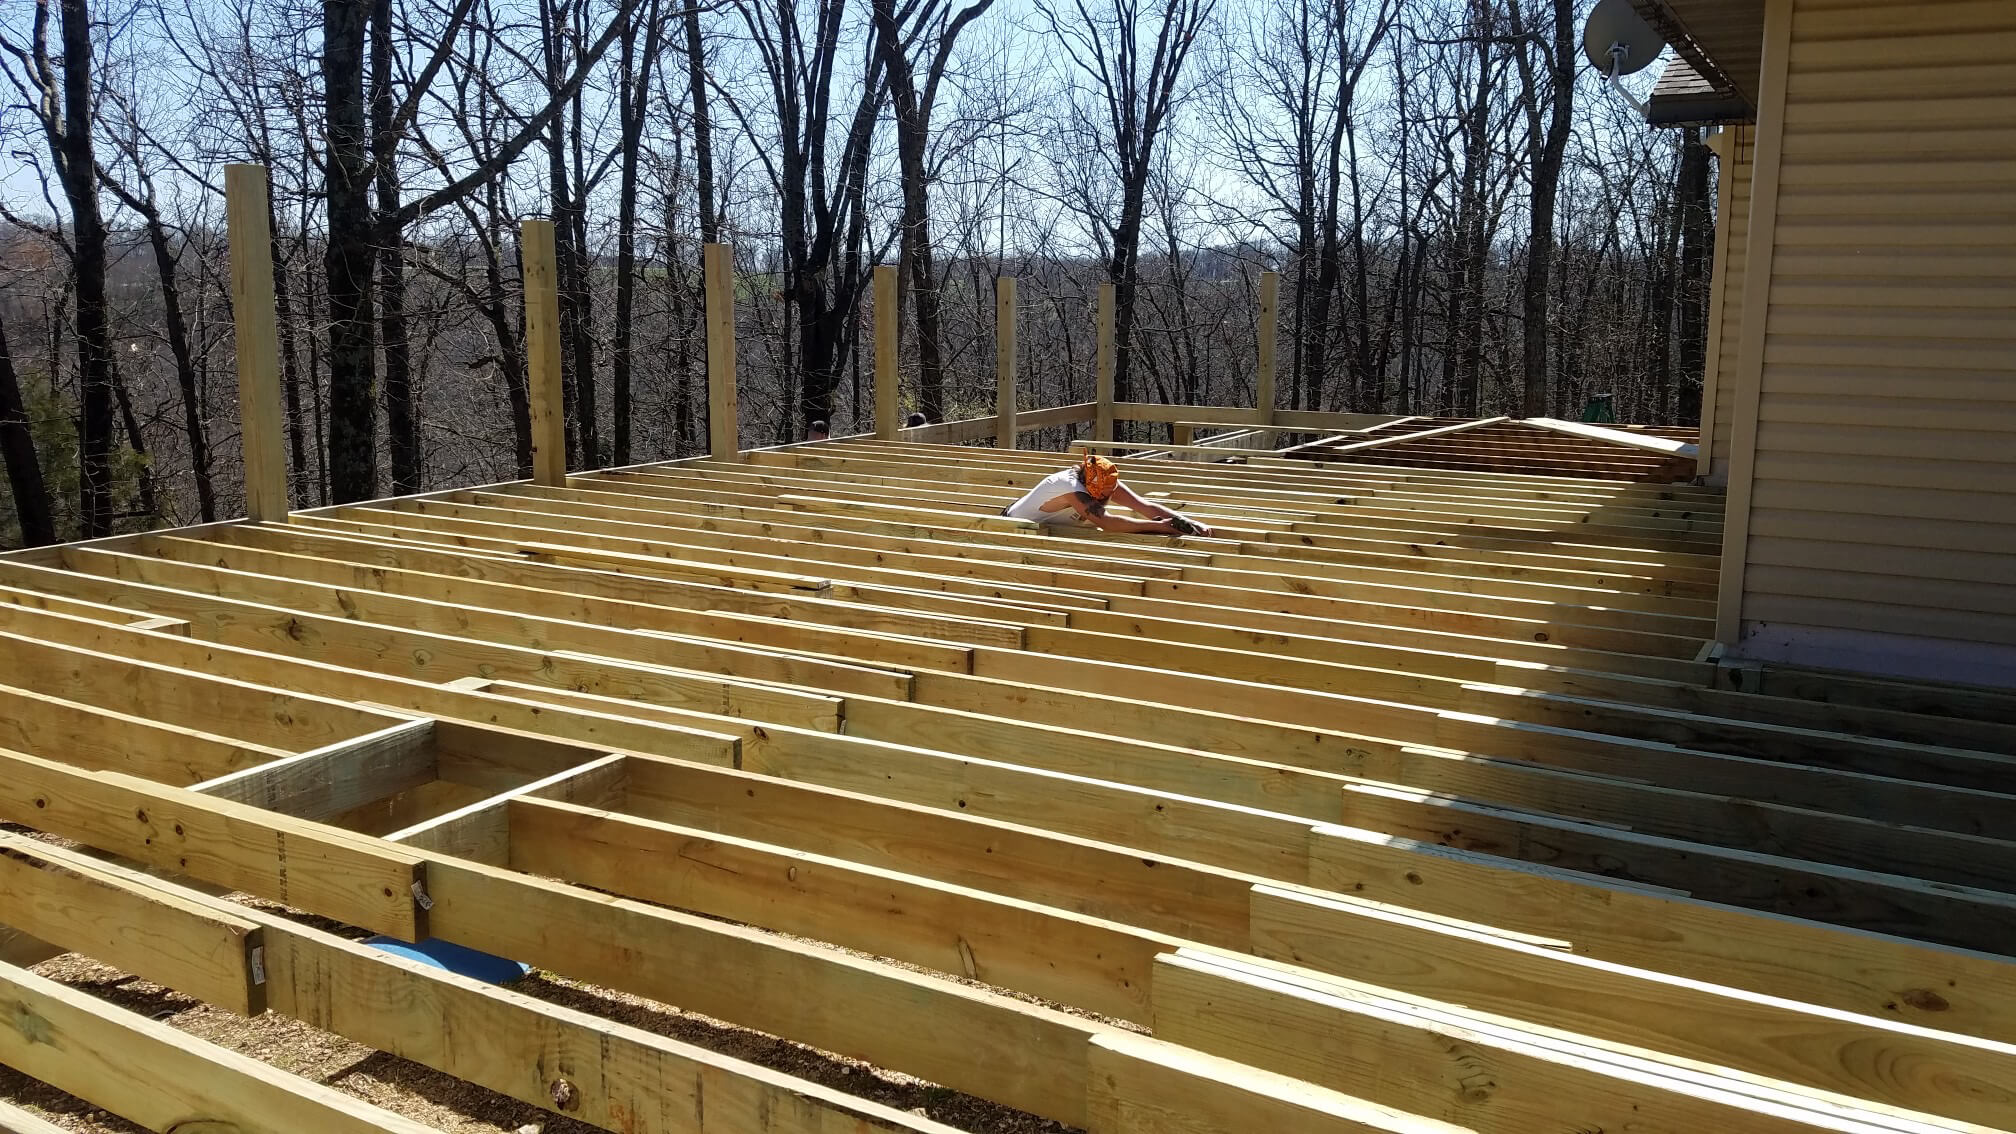 New deck construction at a residential property